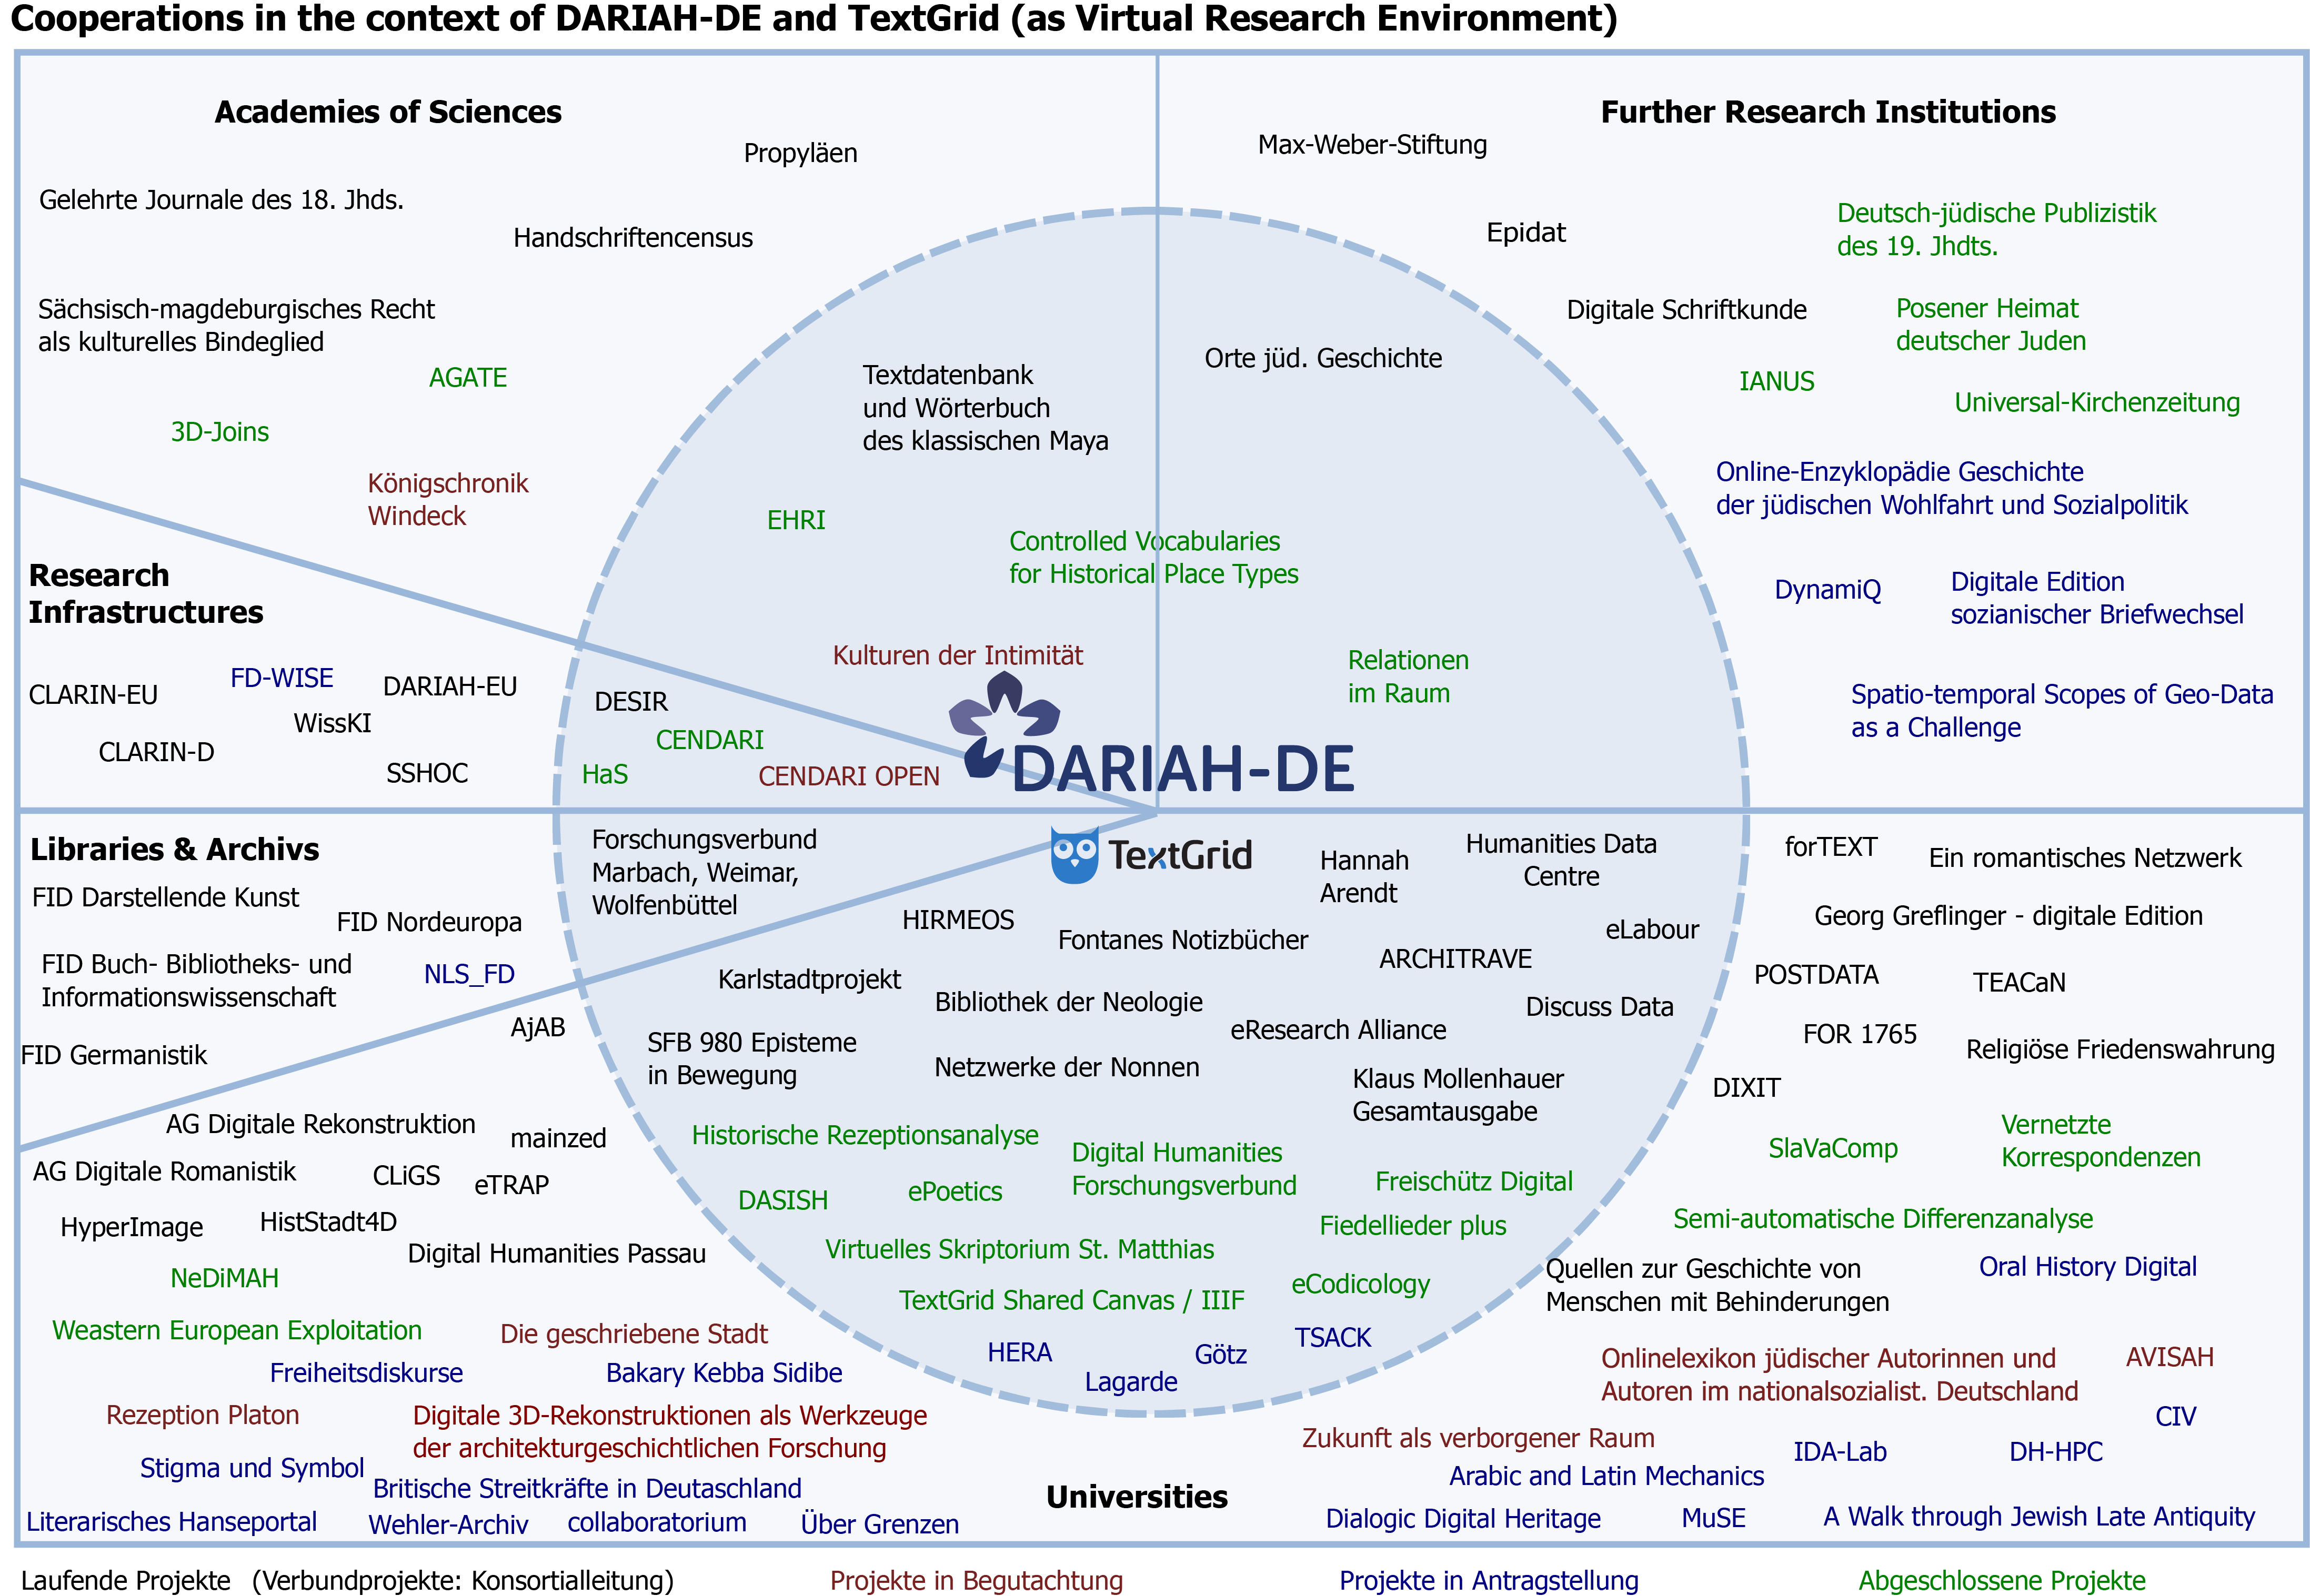 Fig. 1: Cooperation in the context of DARIAH-DE and TextGrid (as Virtual Research Environment)